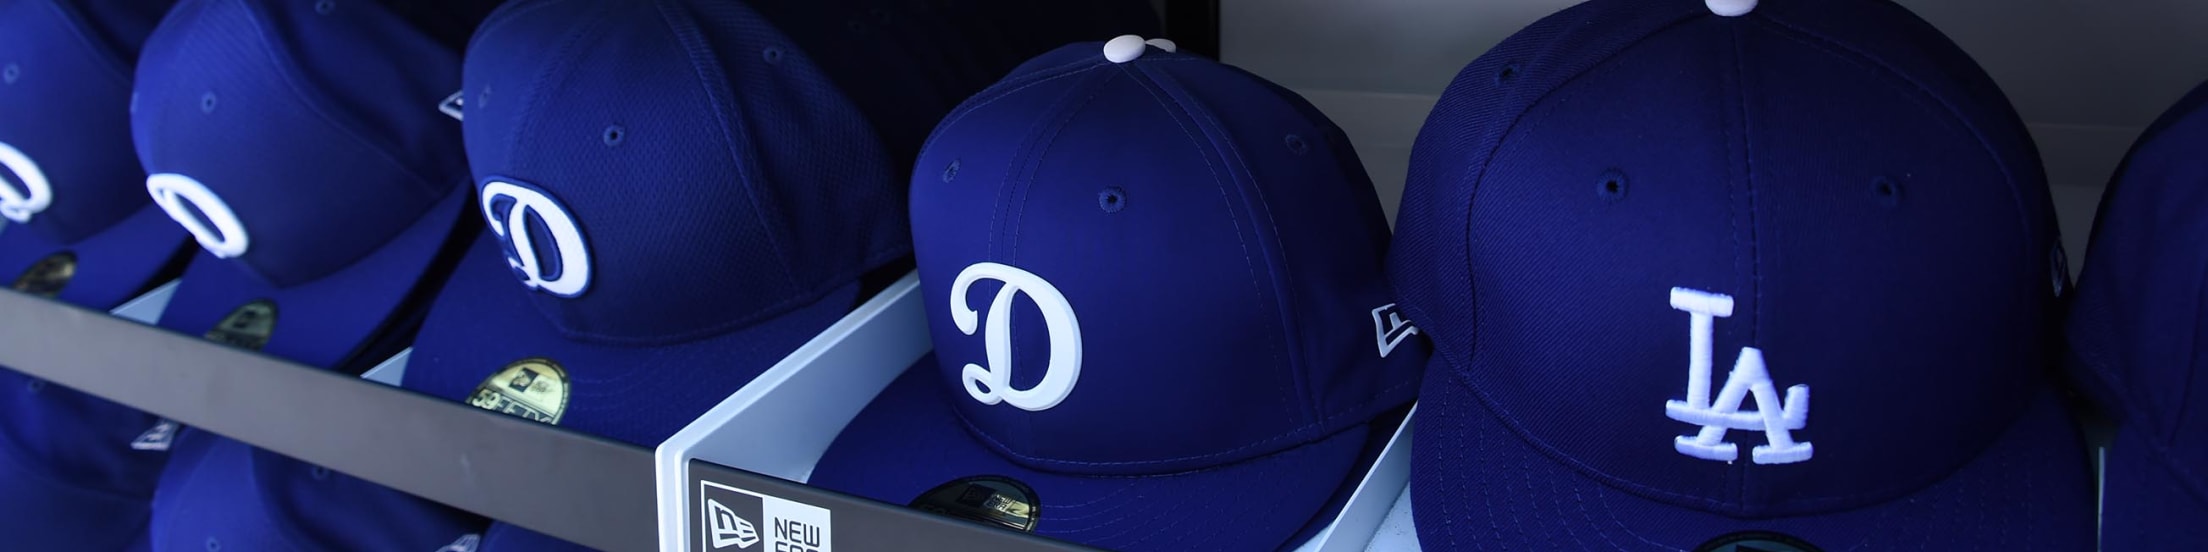 los dodgers new jersey